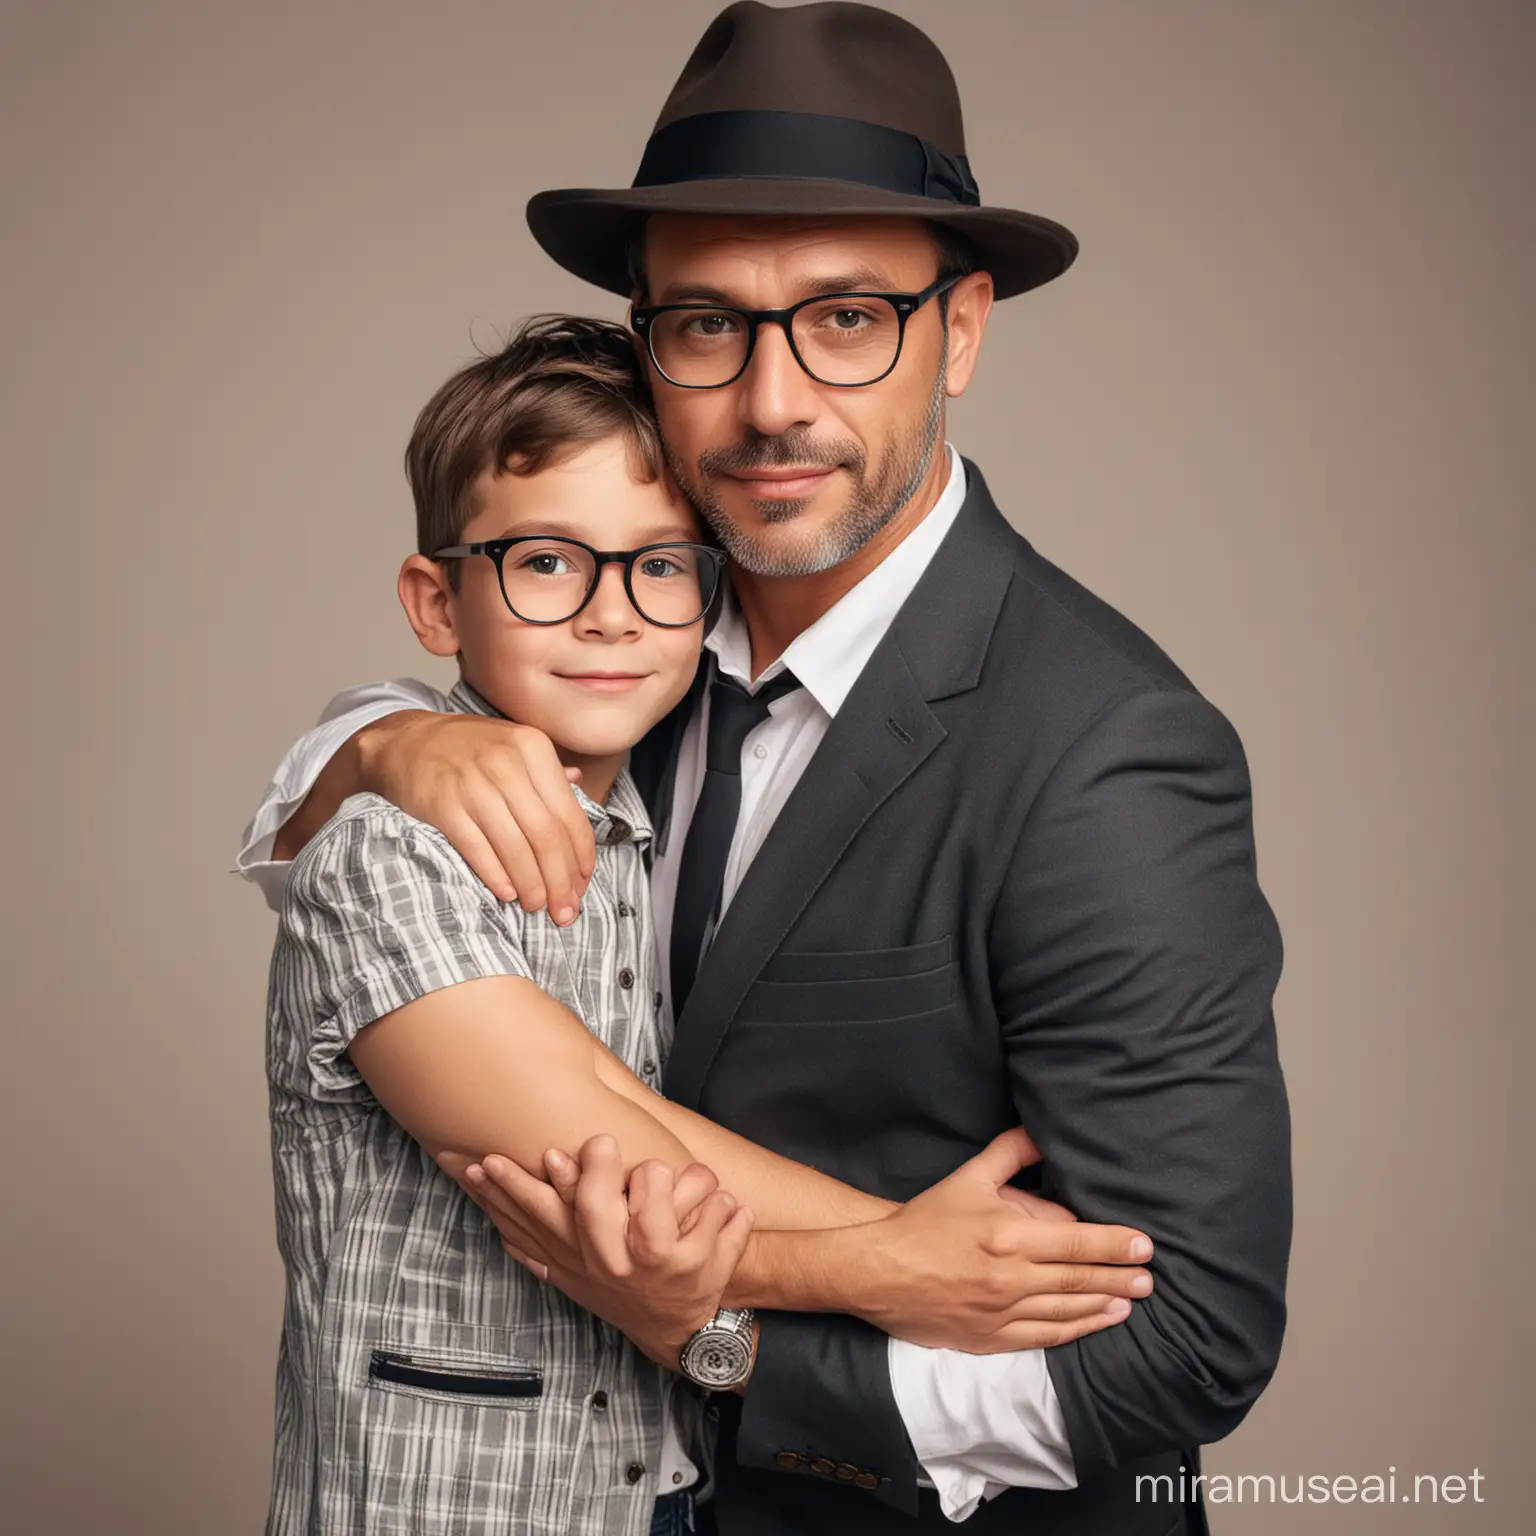 Affectionate Father Embracing Son with Stylish Attire in CloseUp Portrait